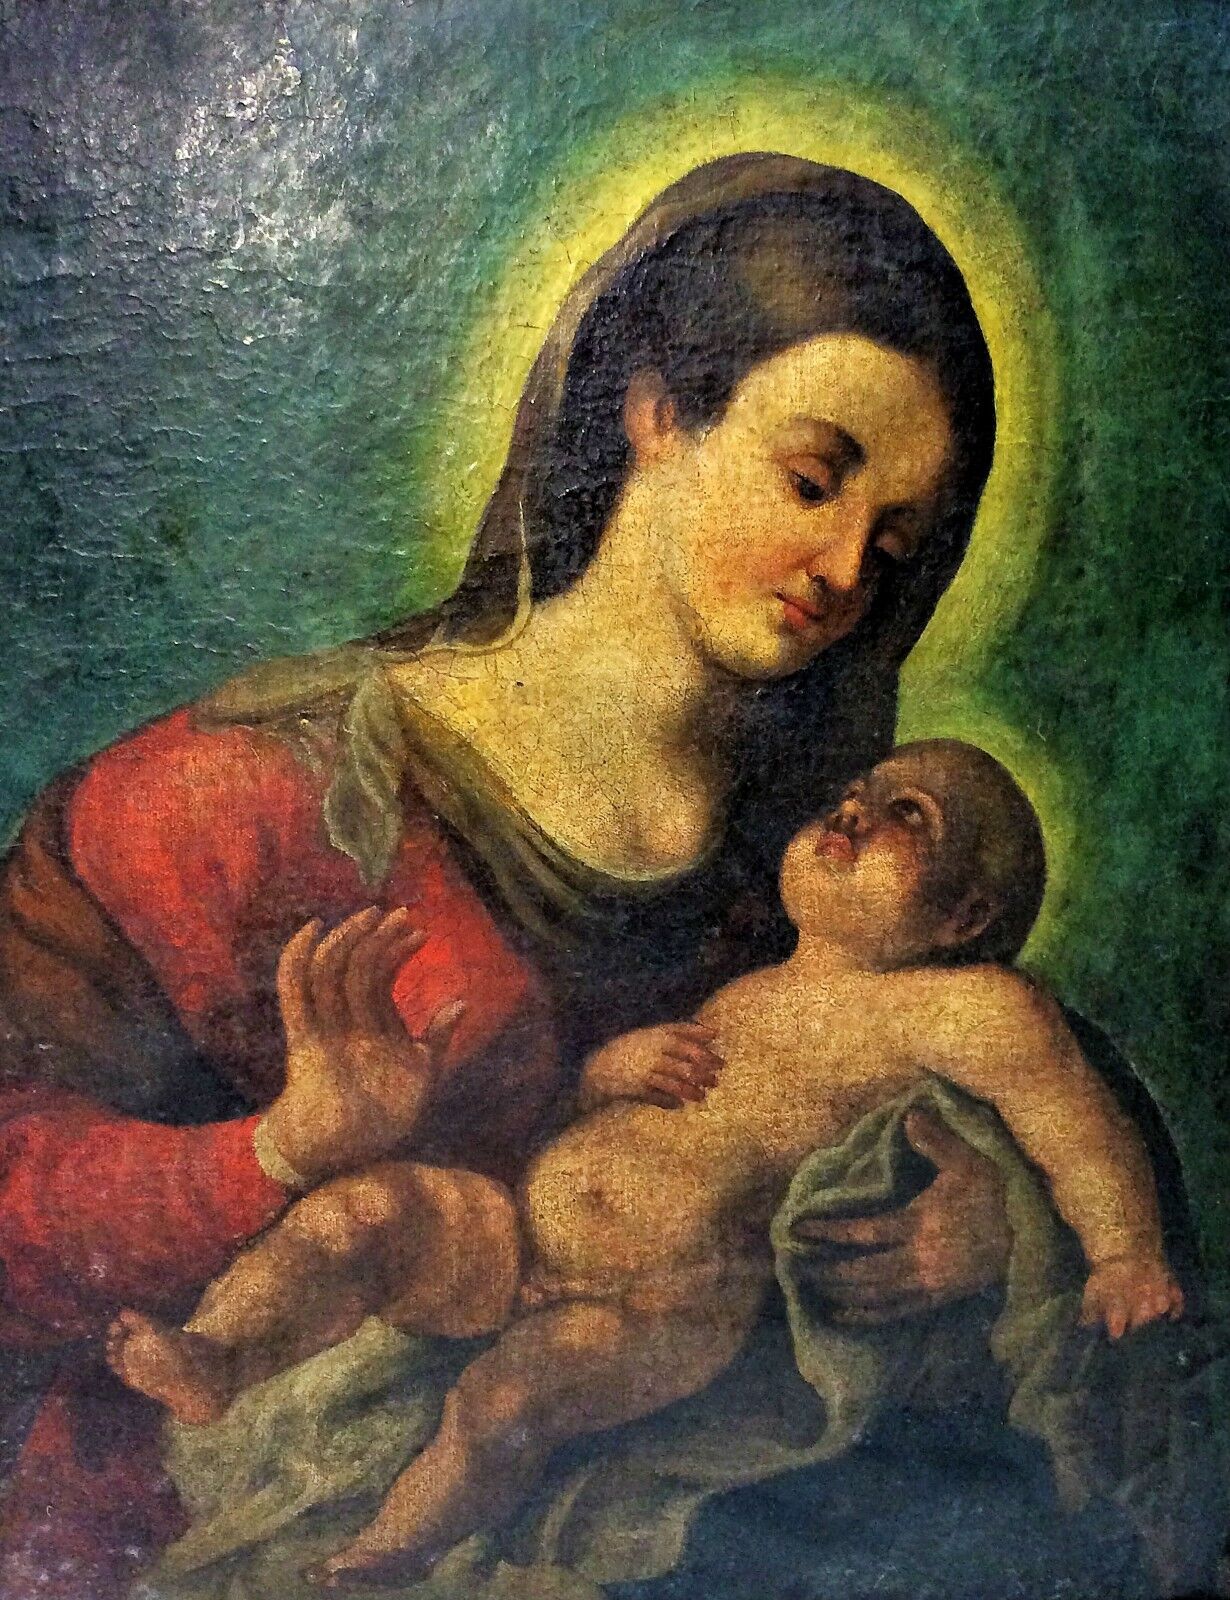 MADONNA WITH CHILD. OIL ON CANVAS. ANONYMOUS. ITALY(?). XVII-XVIII CENTURIE